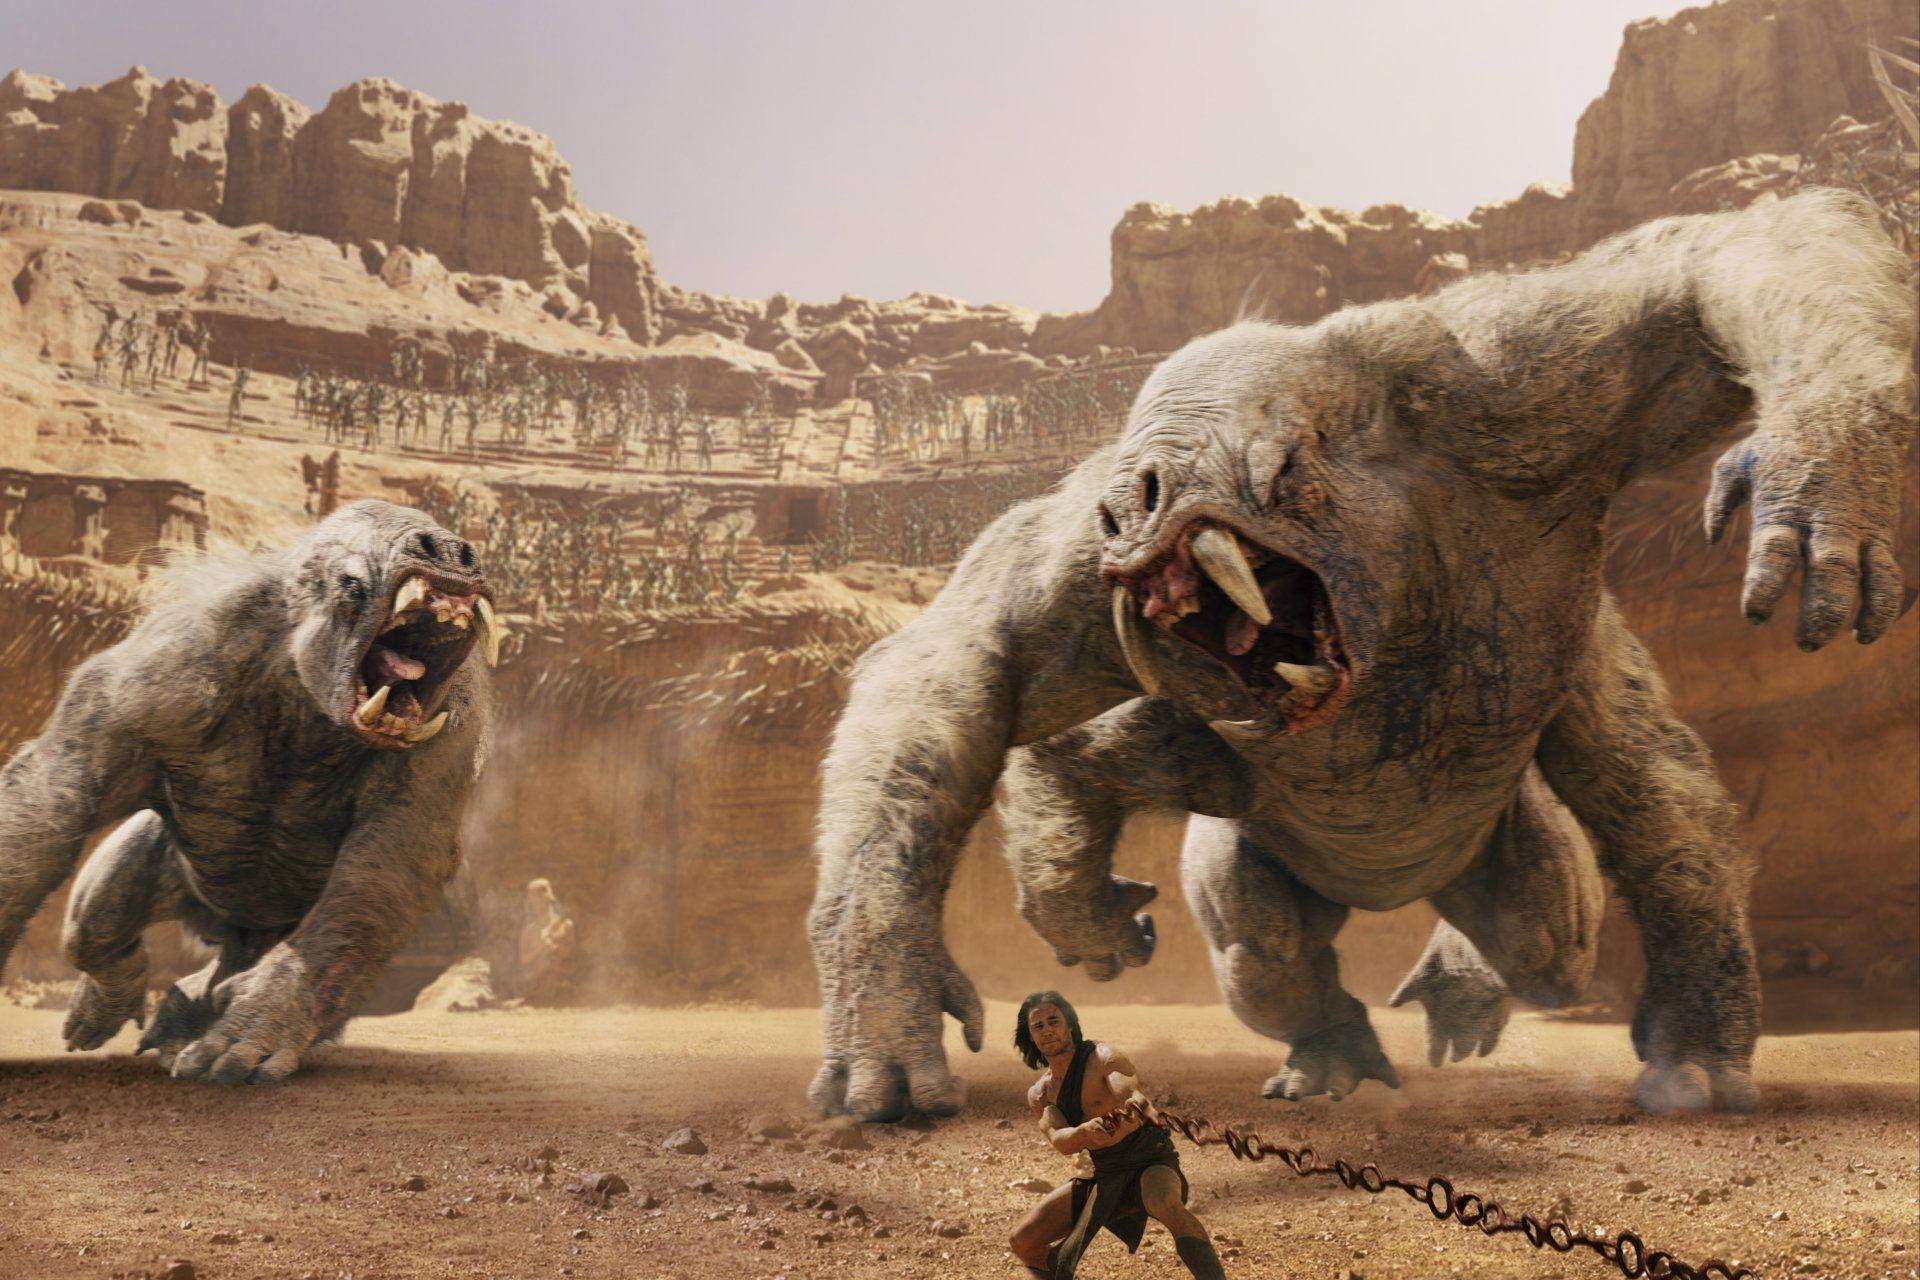 John Carter confronting Huge Primates in a Mysterious World Wallpaper